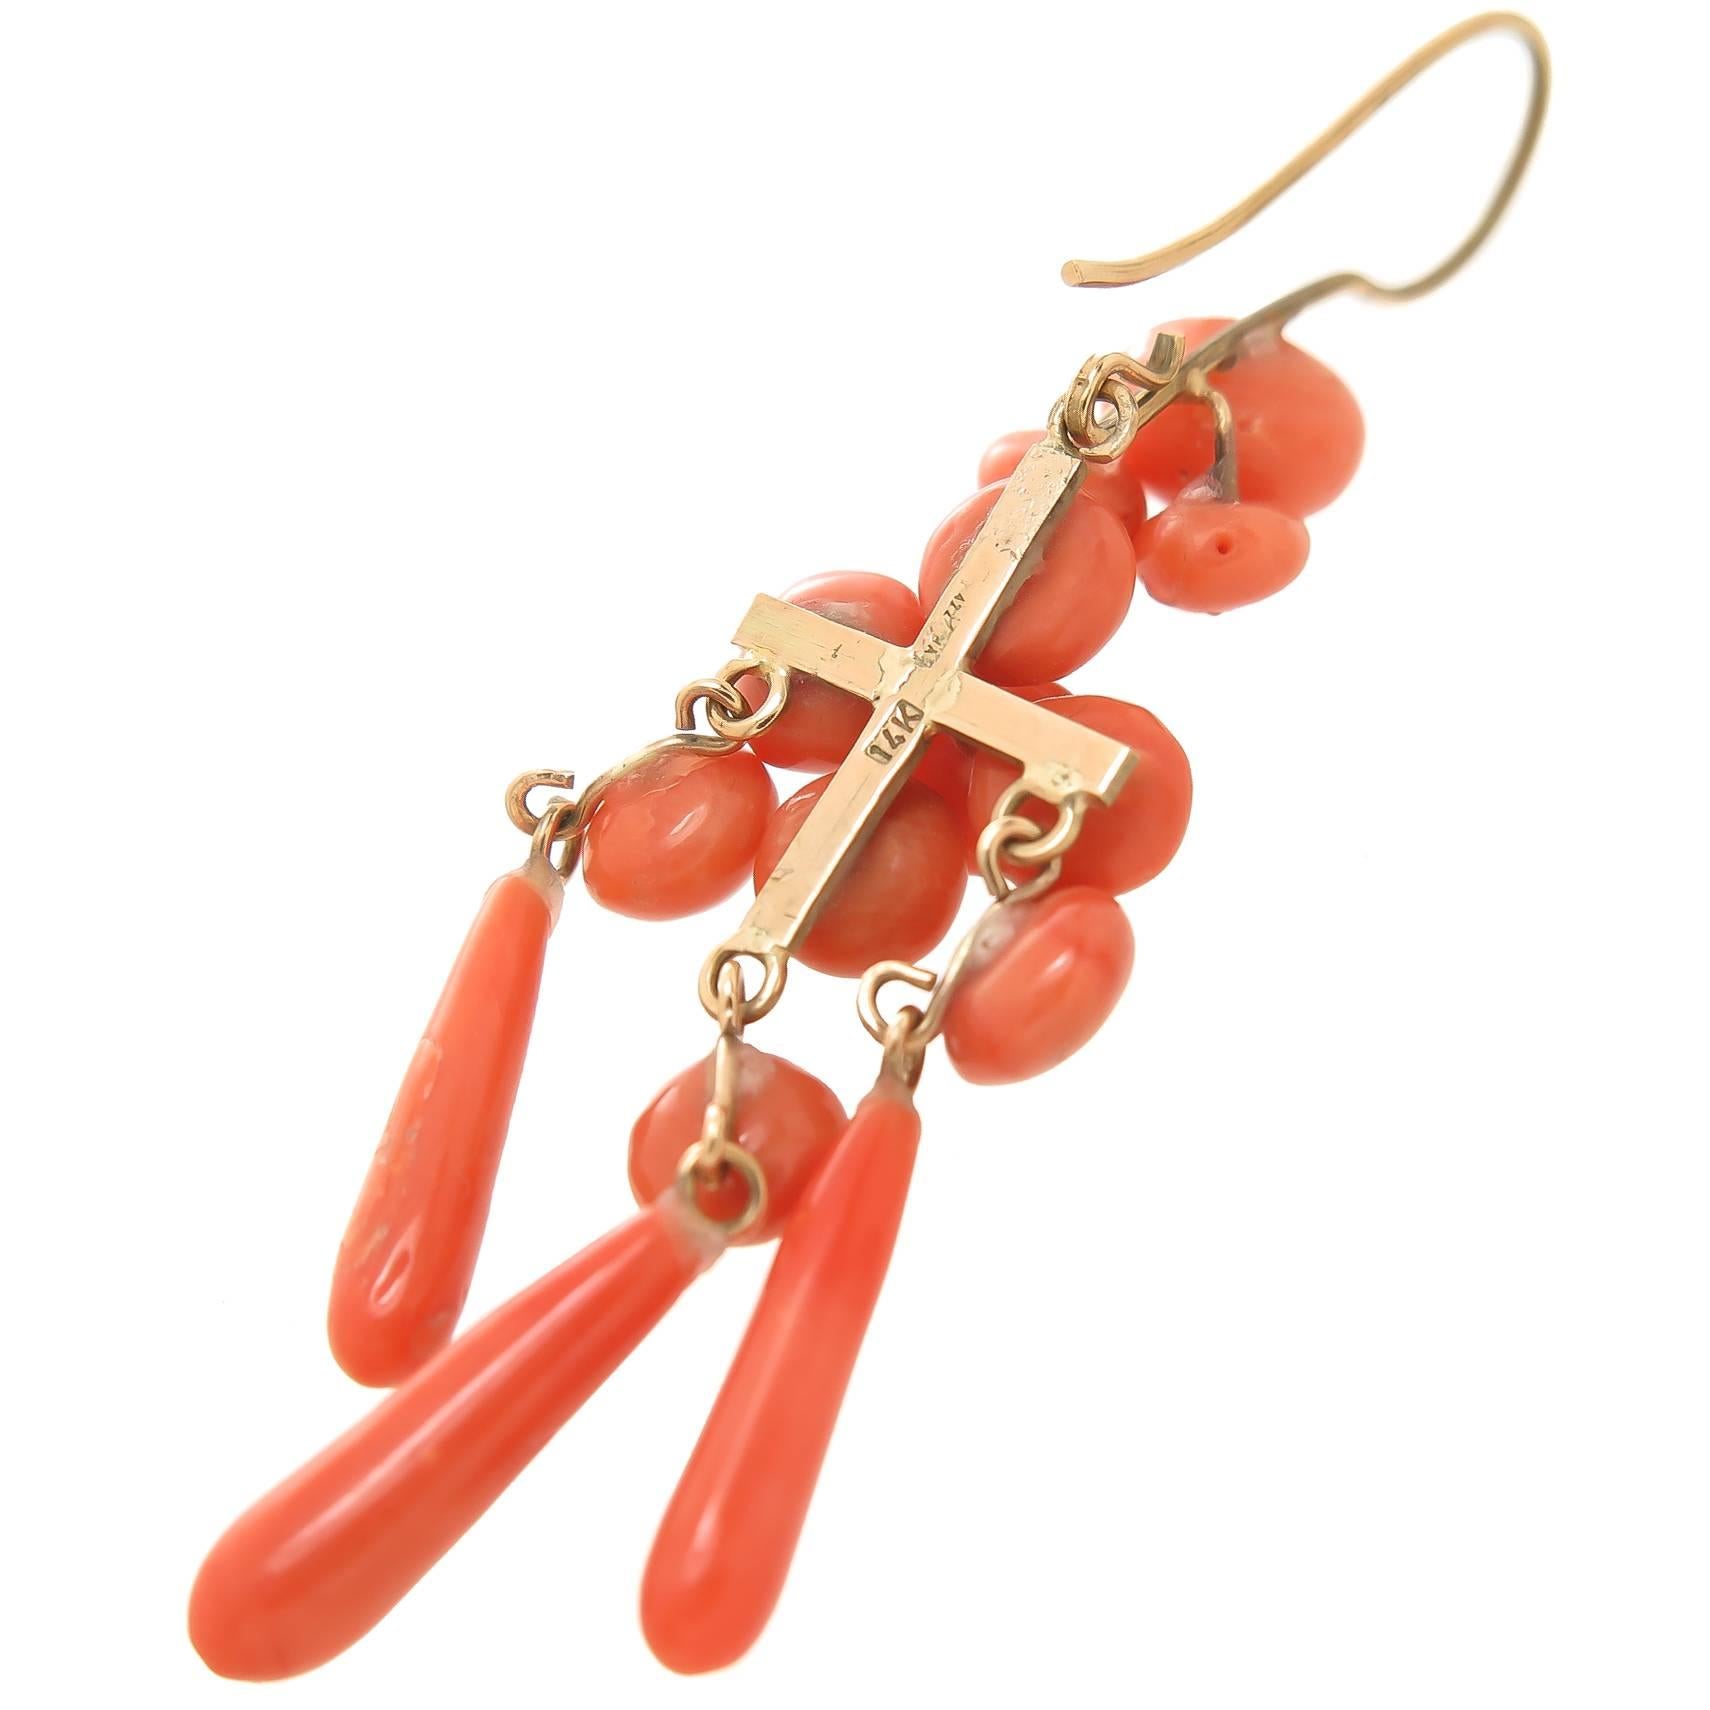 Circa 1900 14K Yellow Gold and Coral long dangle Earrings. Measuring 2 1/2 inch in length and 5/8 inch wide. Very nice color Coral typical of most Victorian jewelry of this time period. excellent Condition. 